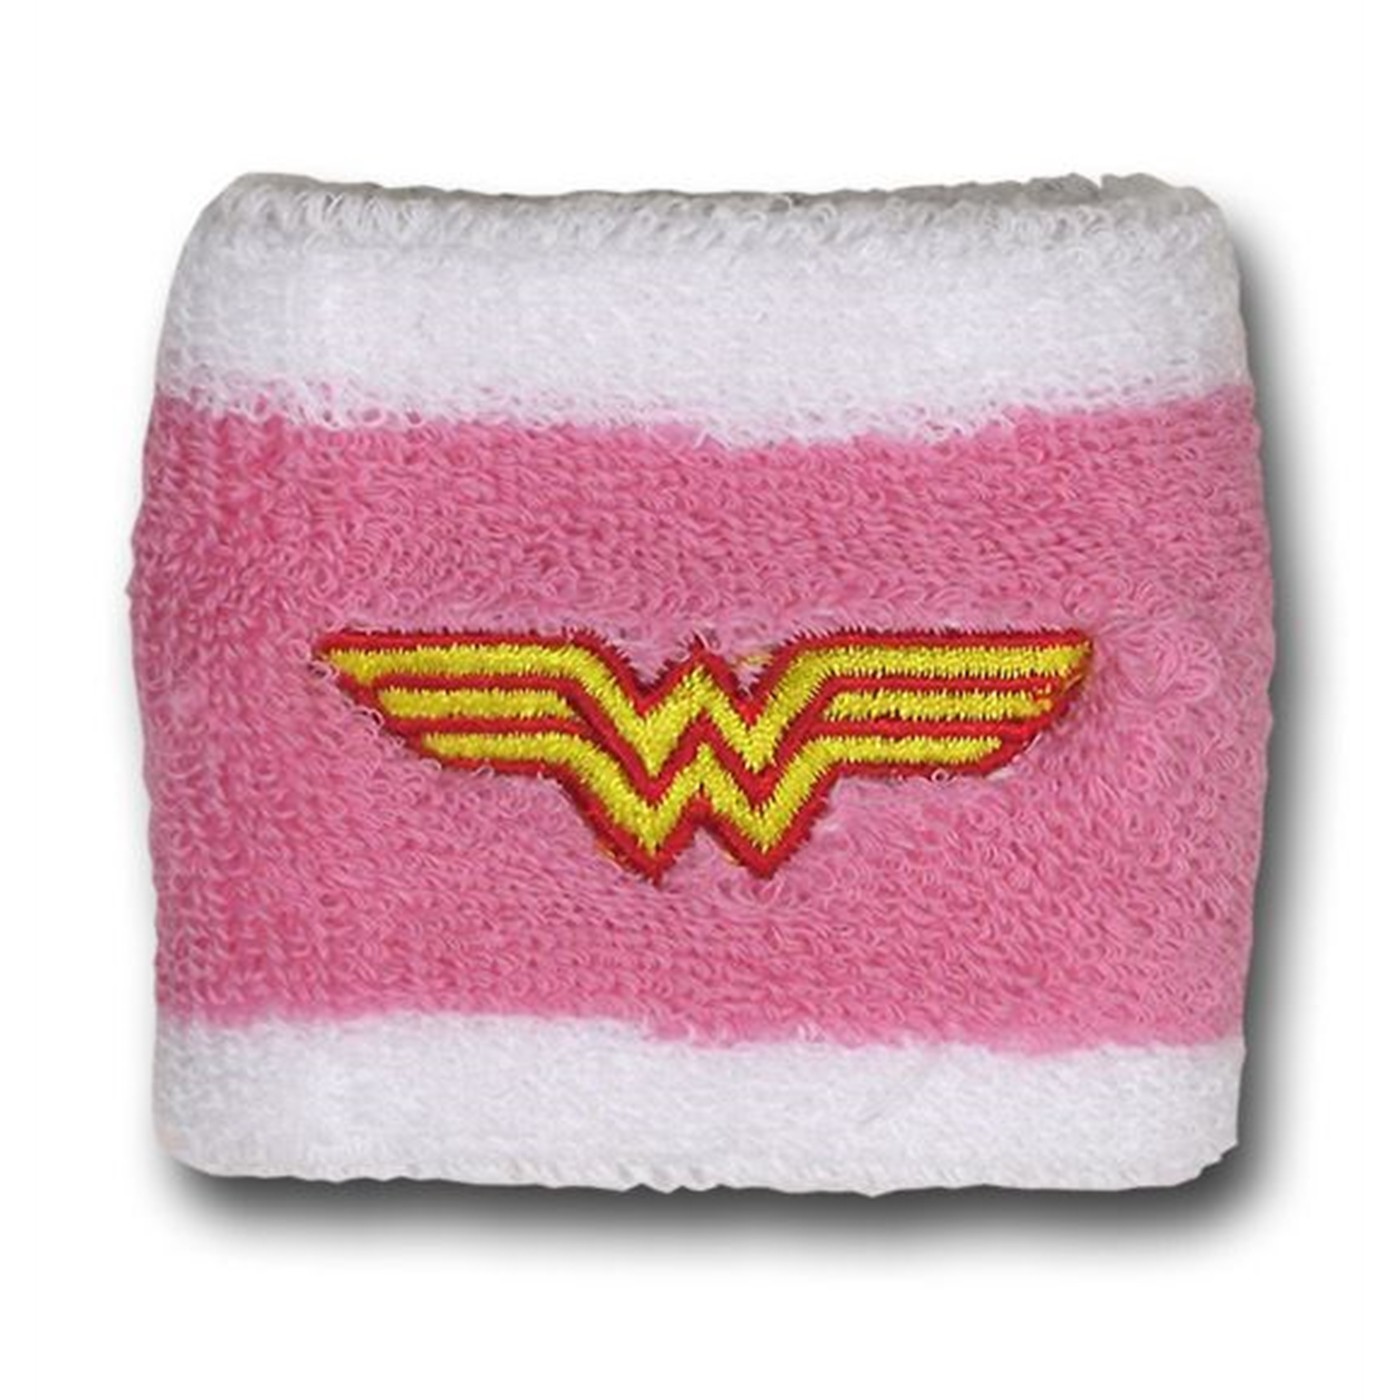 Wonder Woman White and Pink Terrycloth Wristband